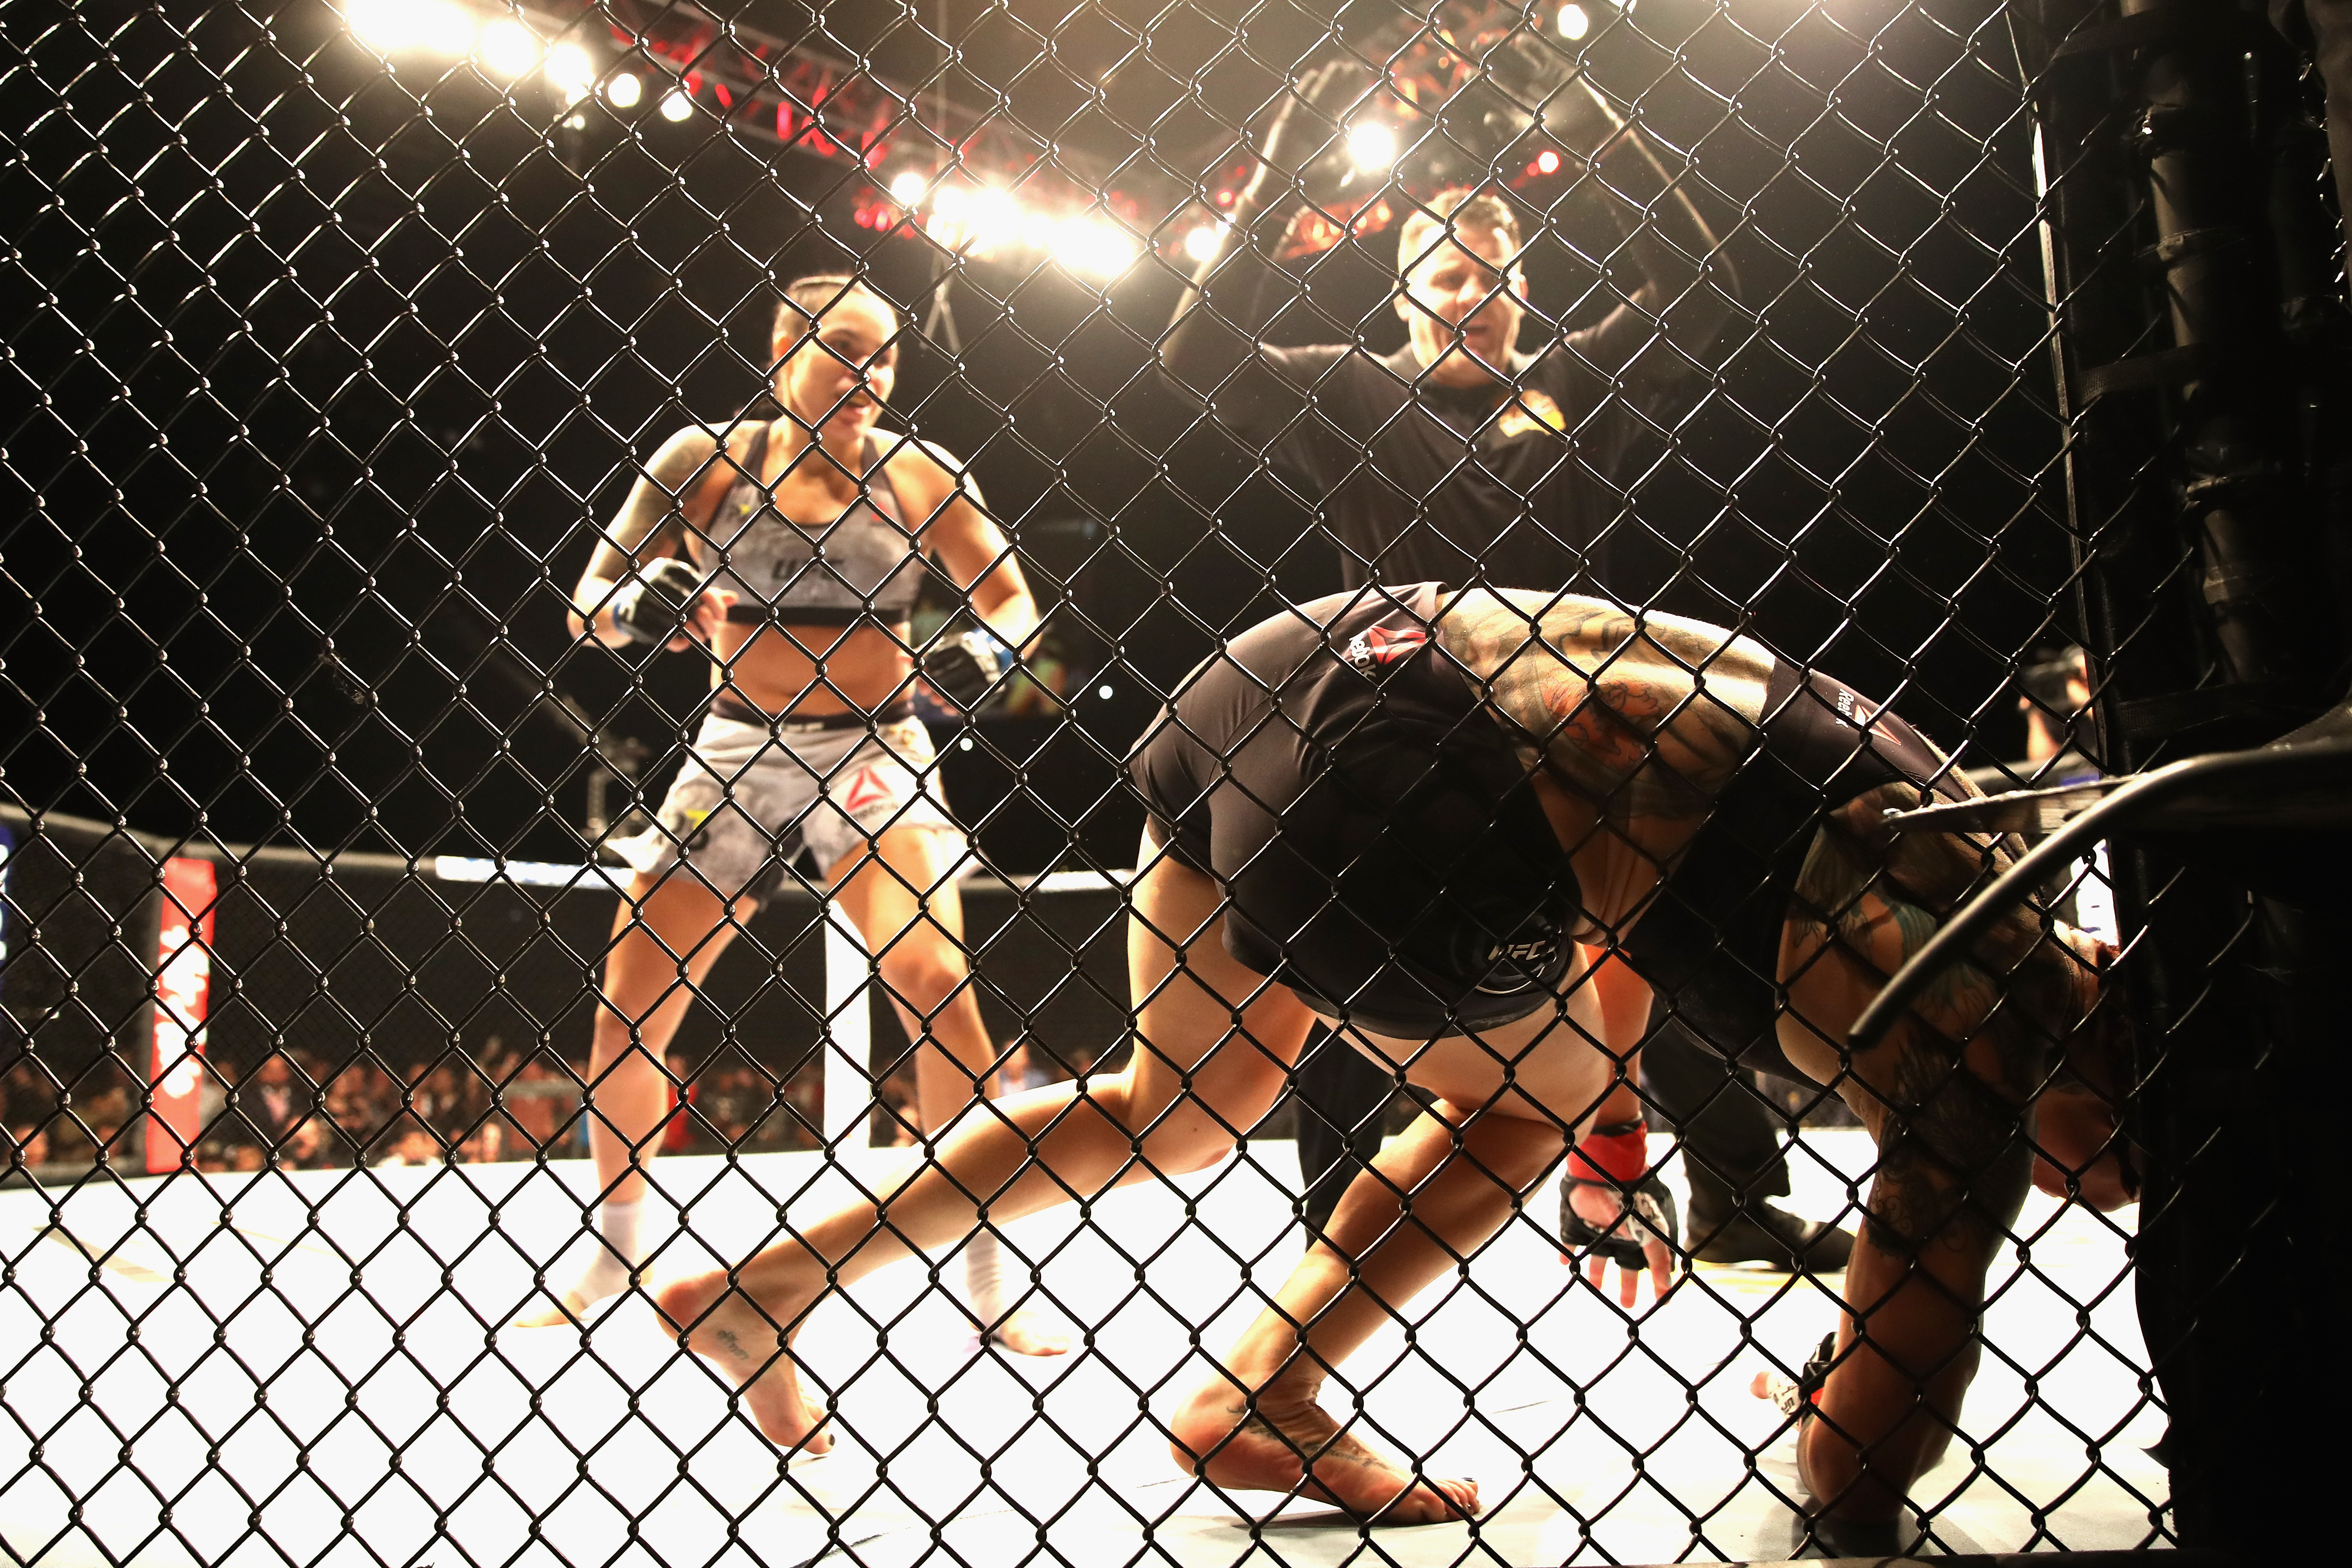 INGLEWOOD, CA - DECEMBER 29: Cris Cyborg of Brazil (right) is defeated by TKO in the first round by Amanda Nunes of Brazil (left) during a Women's Feather weight bout during the UFC 232 event inside The Forum on December 29, 2018 in Inglewood, California. (Photo by Sean M. Haffey/Getty Images)